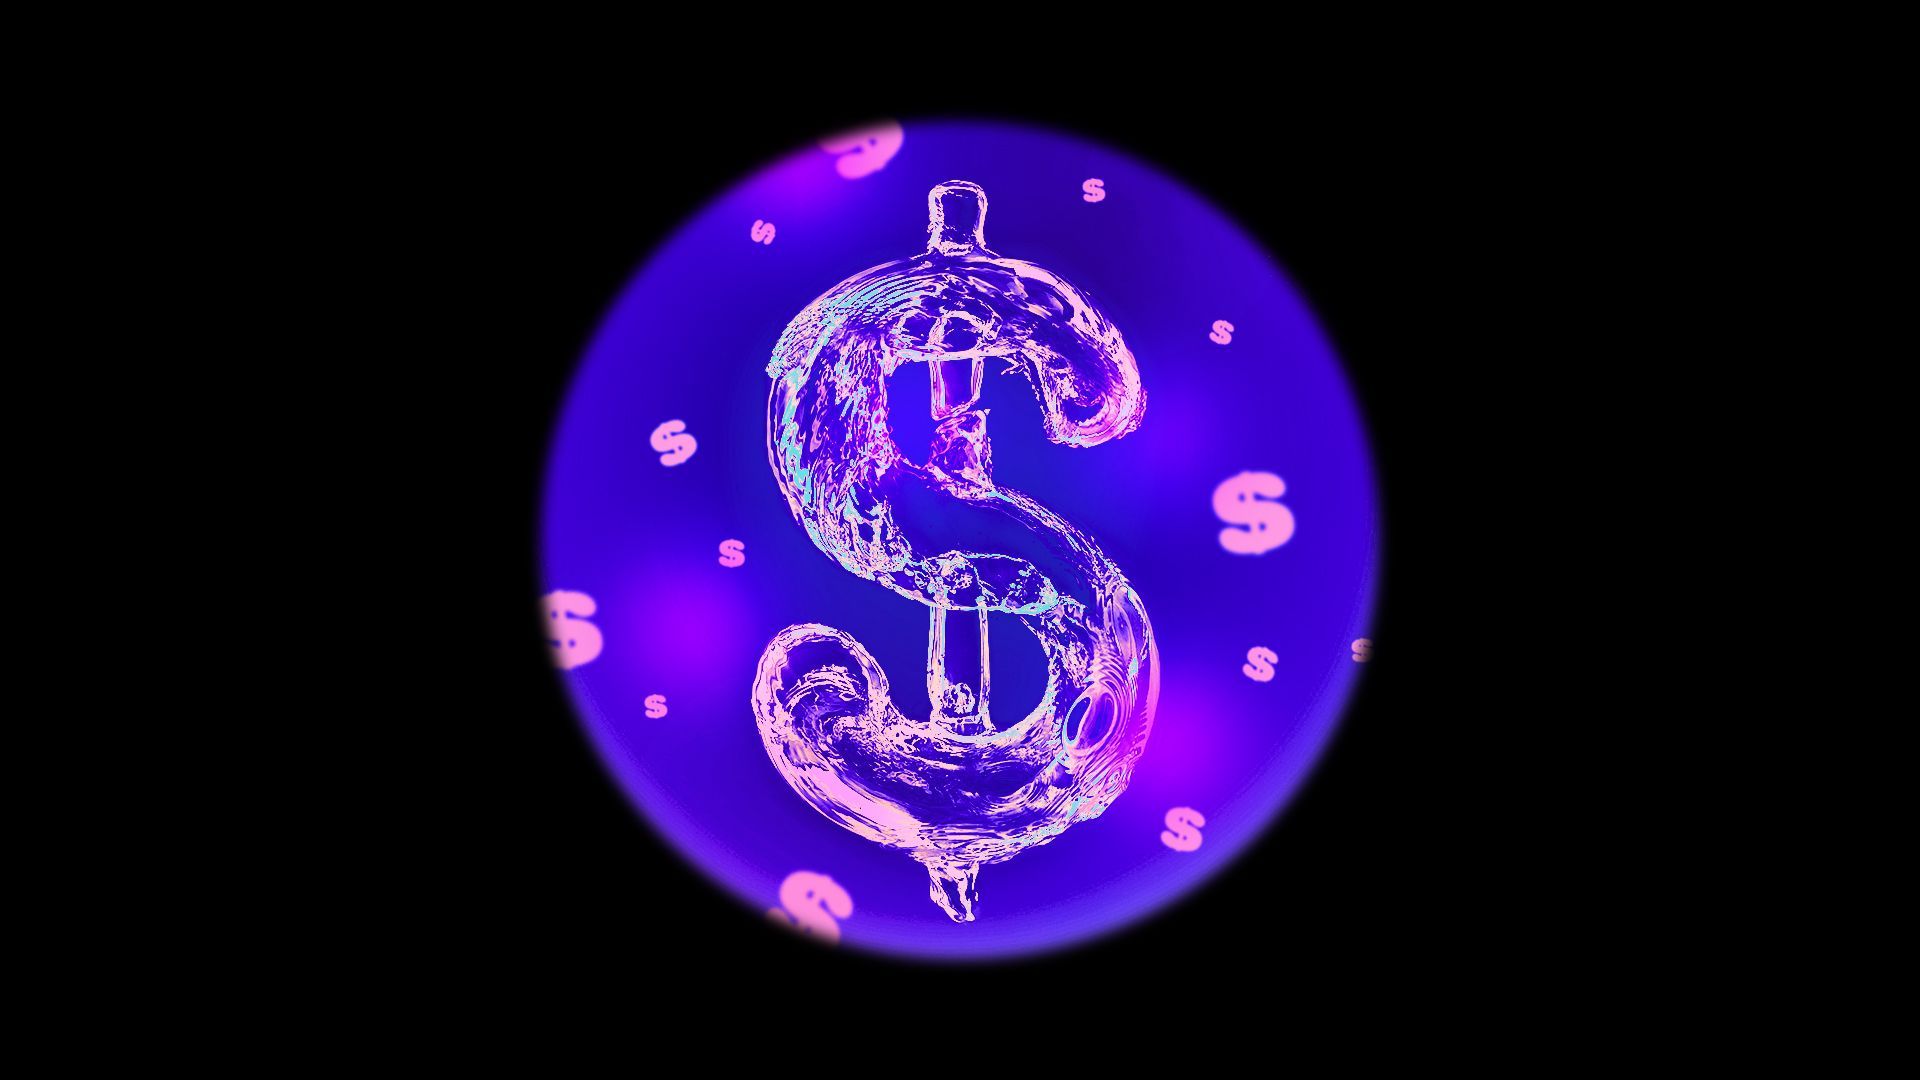 Illustration of a view through a microscope looking at dollar sign-shaped cells